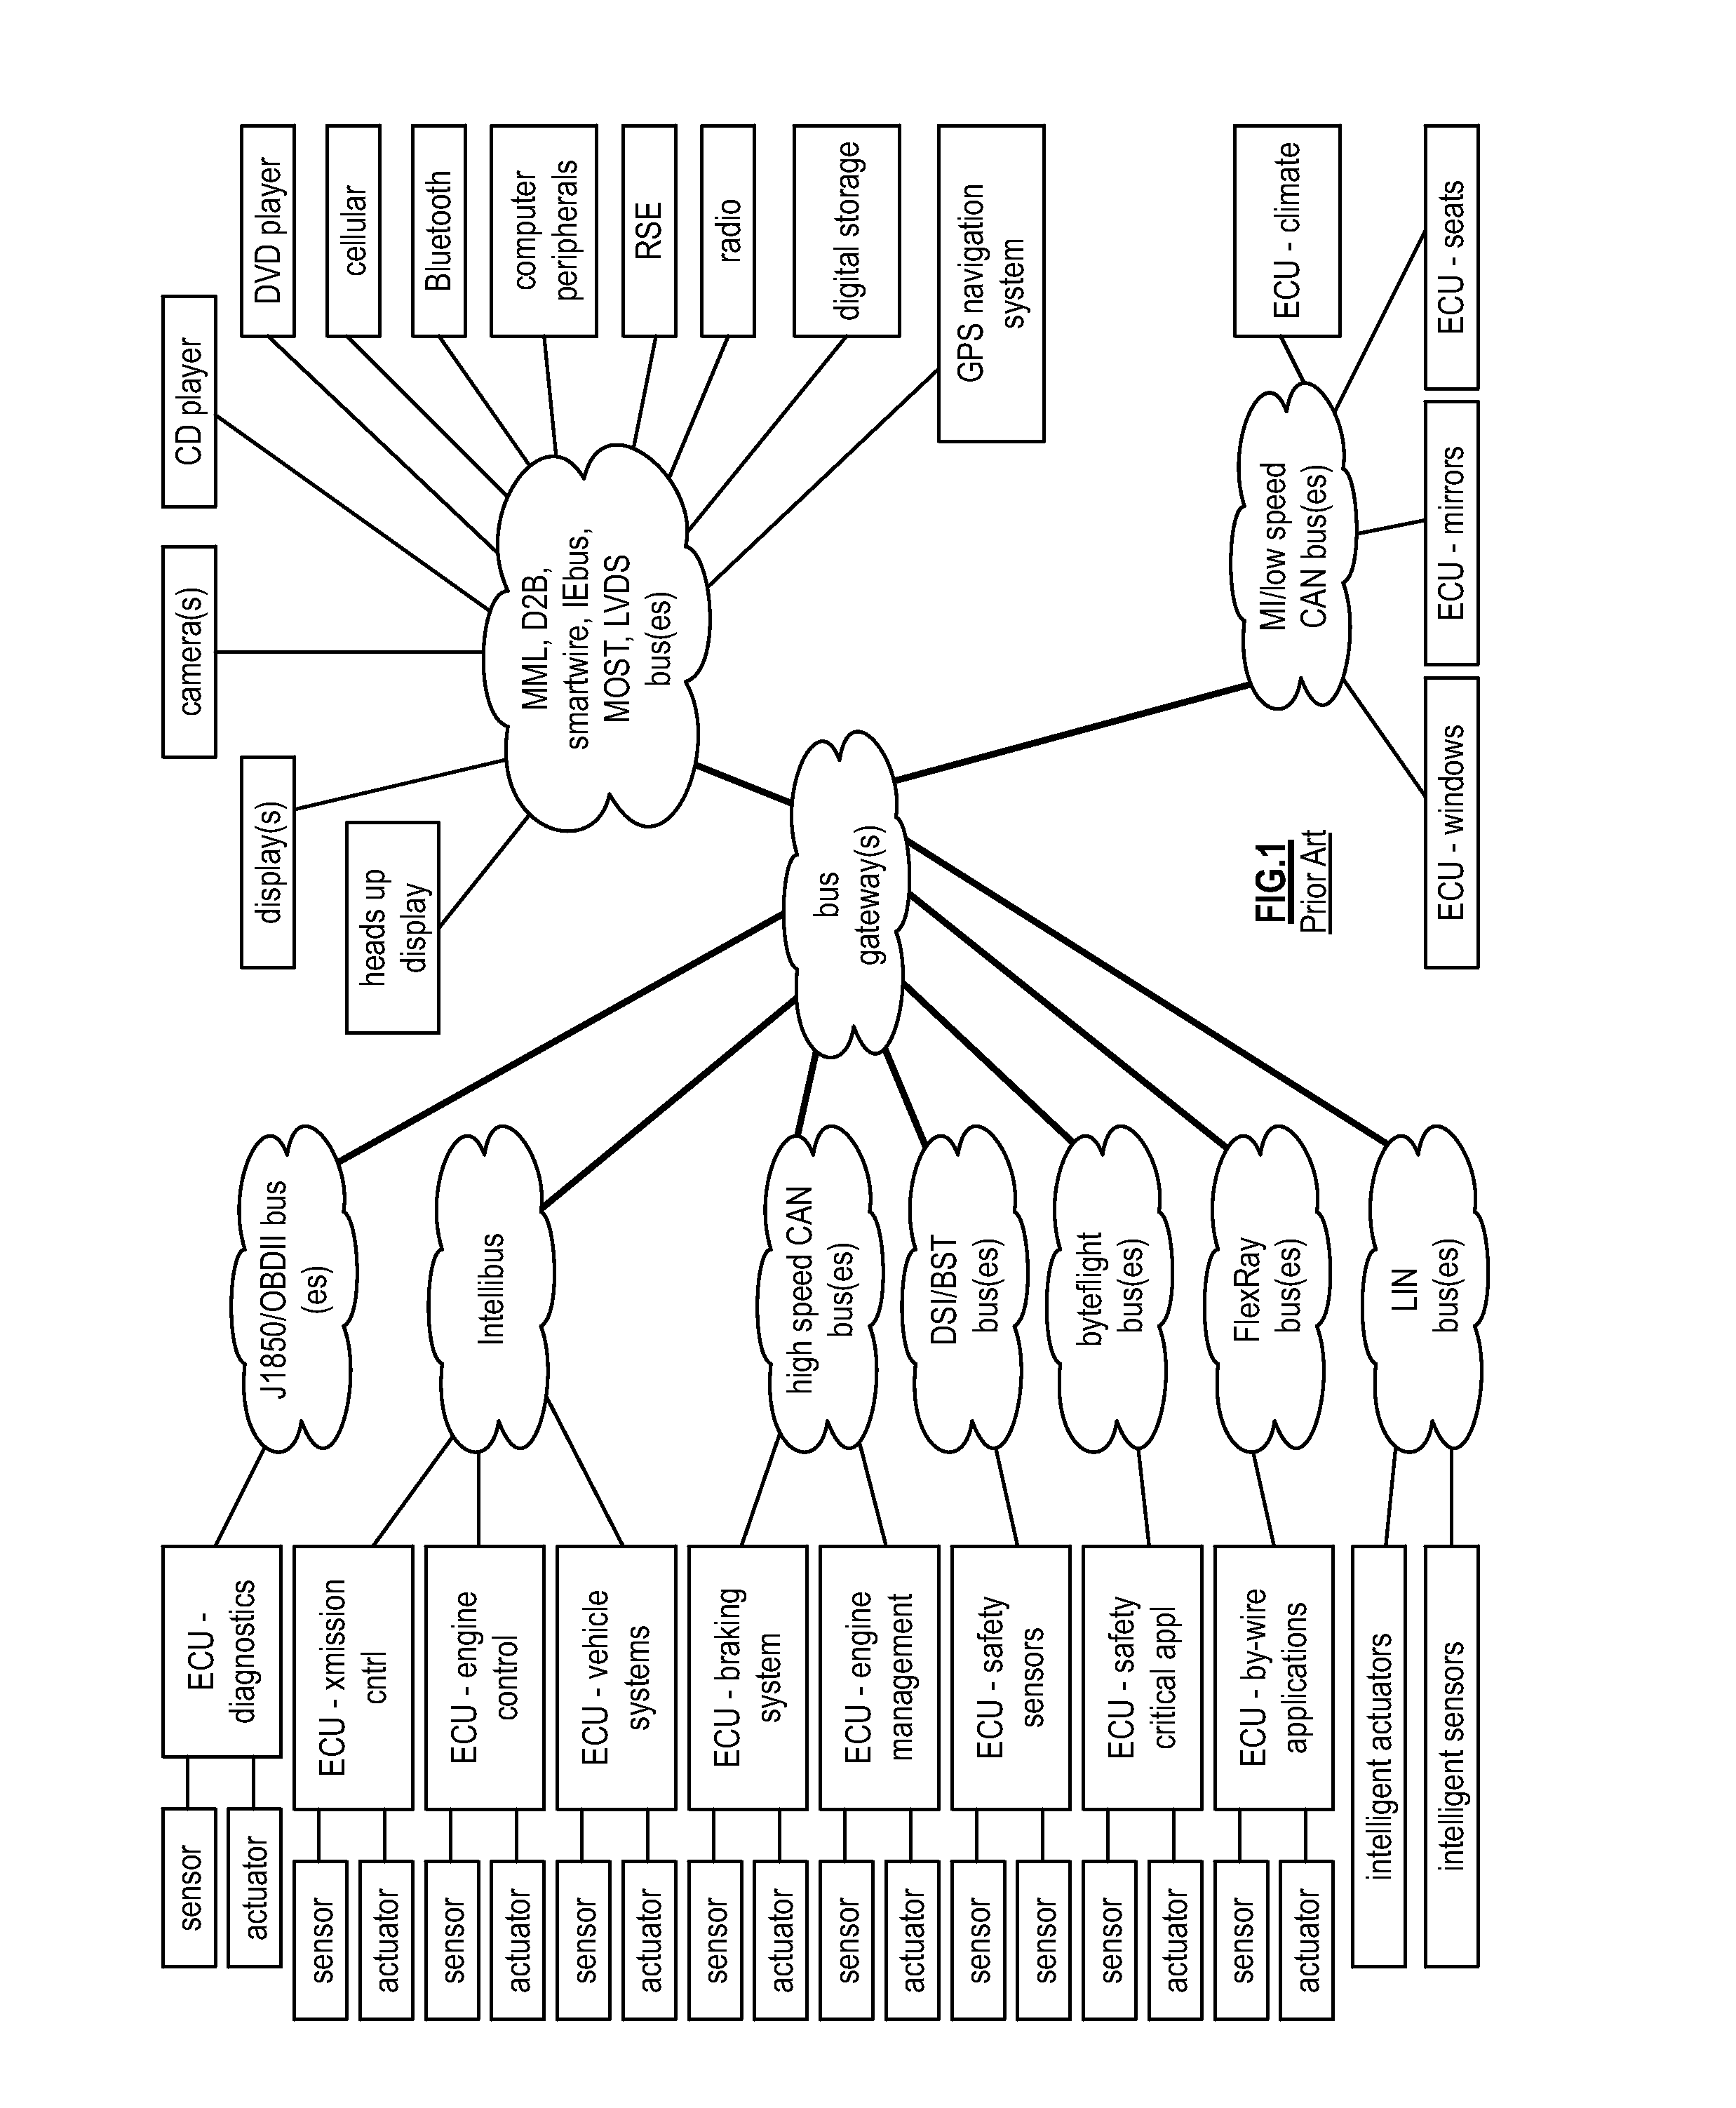 Network management module for a vehicle communication network